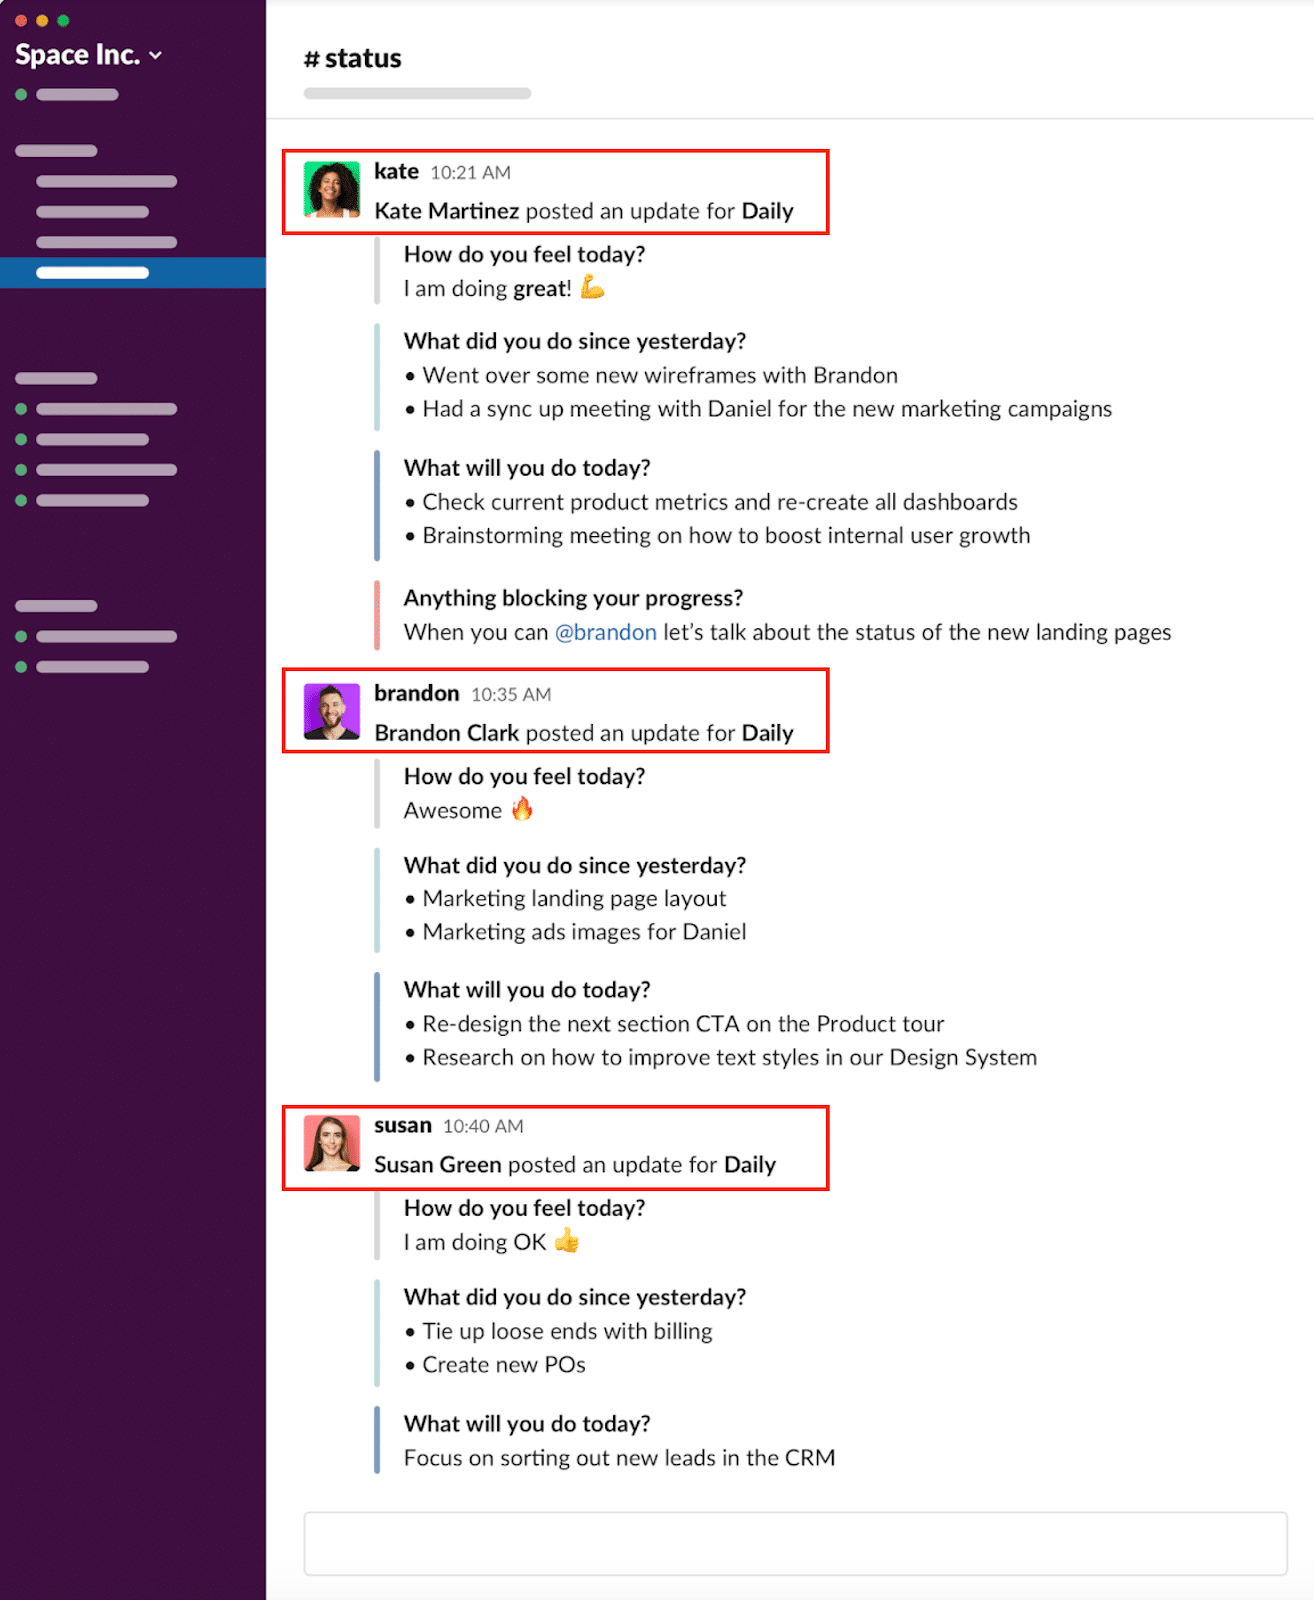 Status updates and responses can be easily made from within Slack thanks to Geekbot.